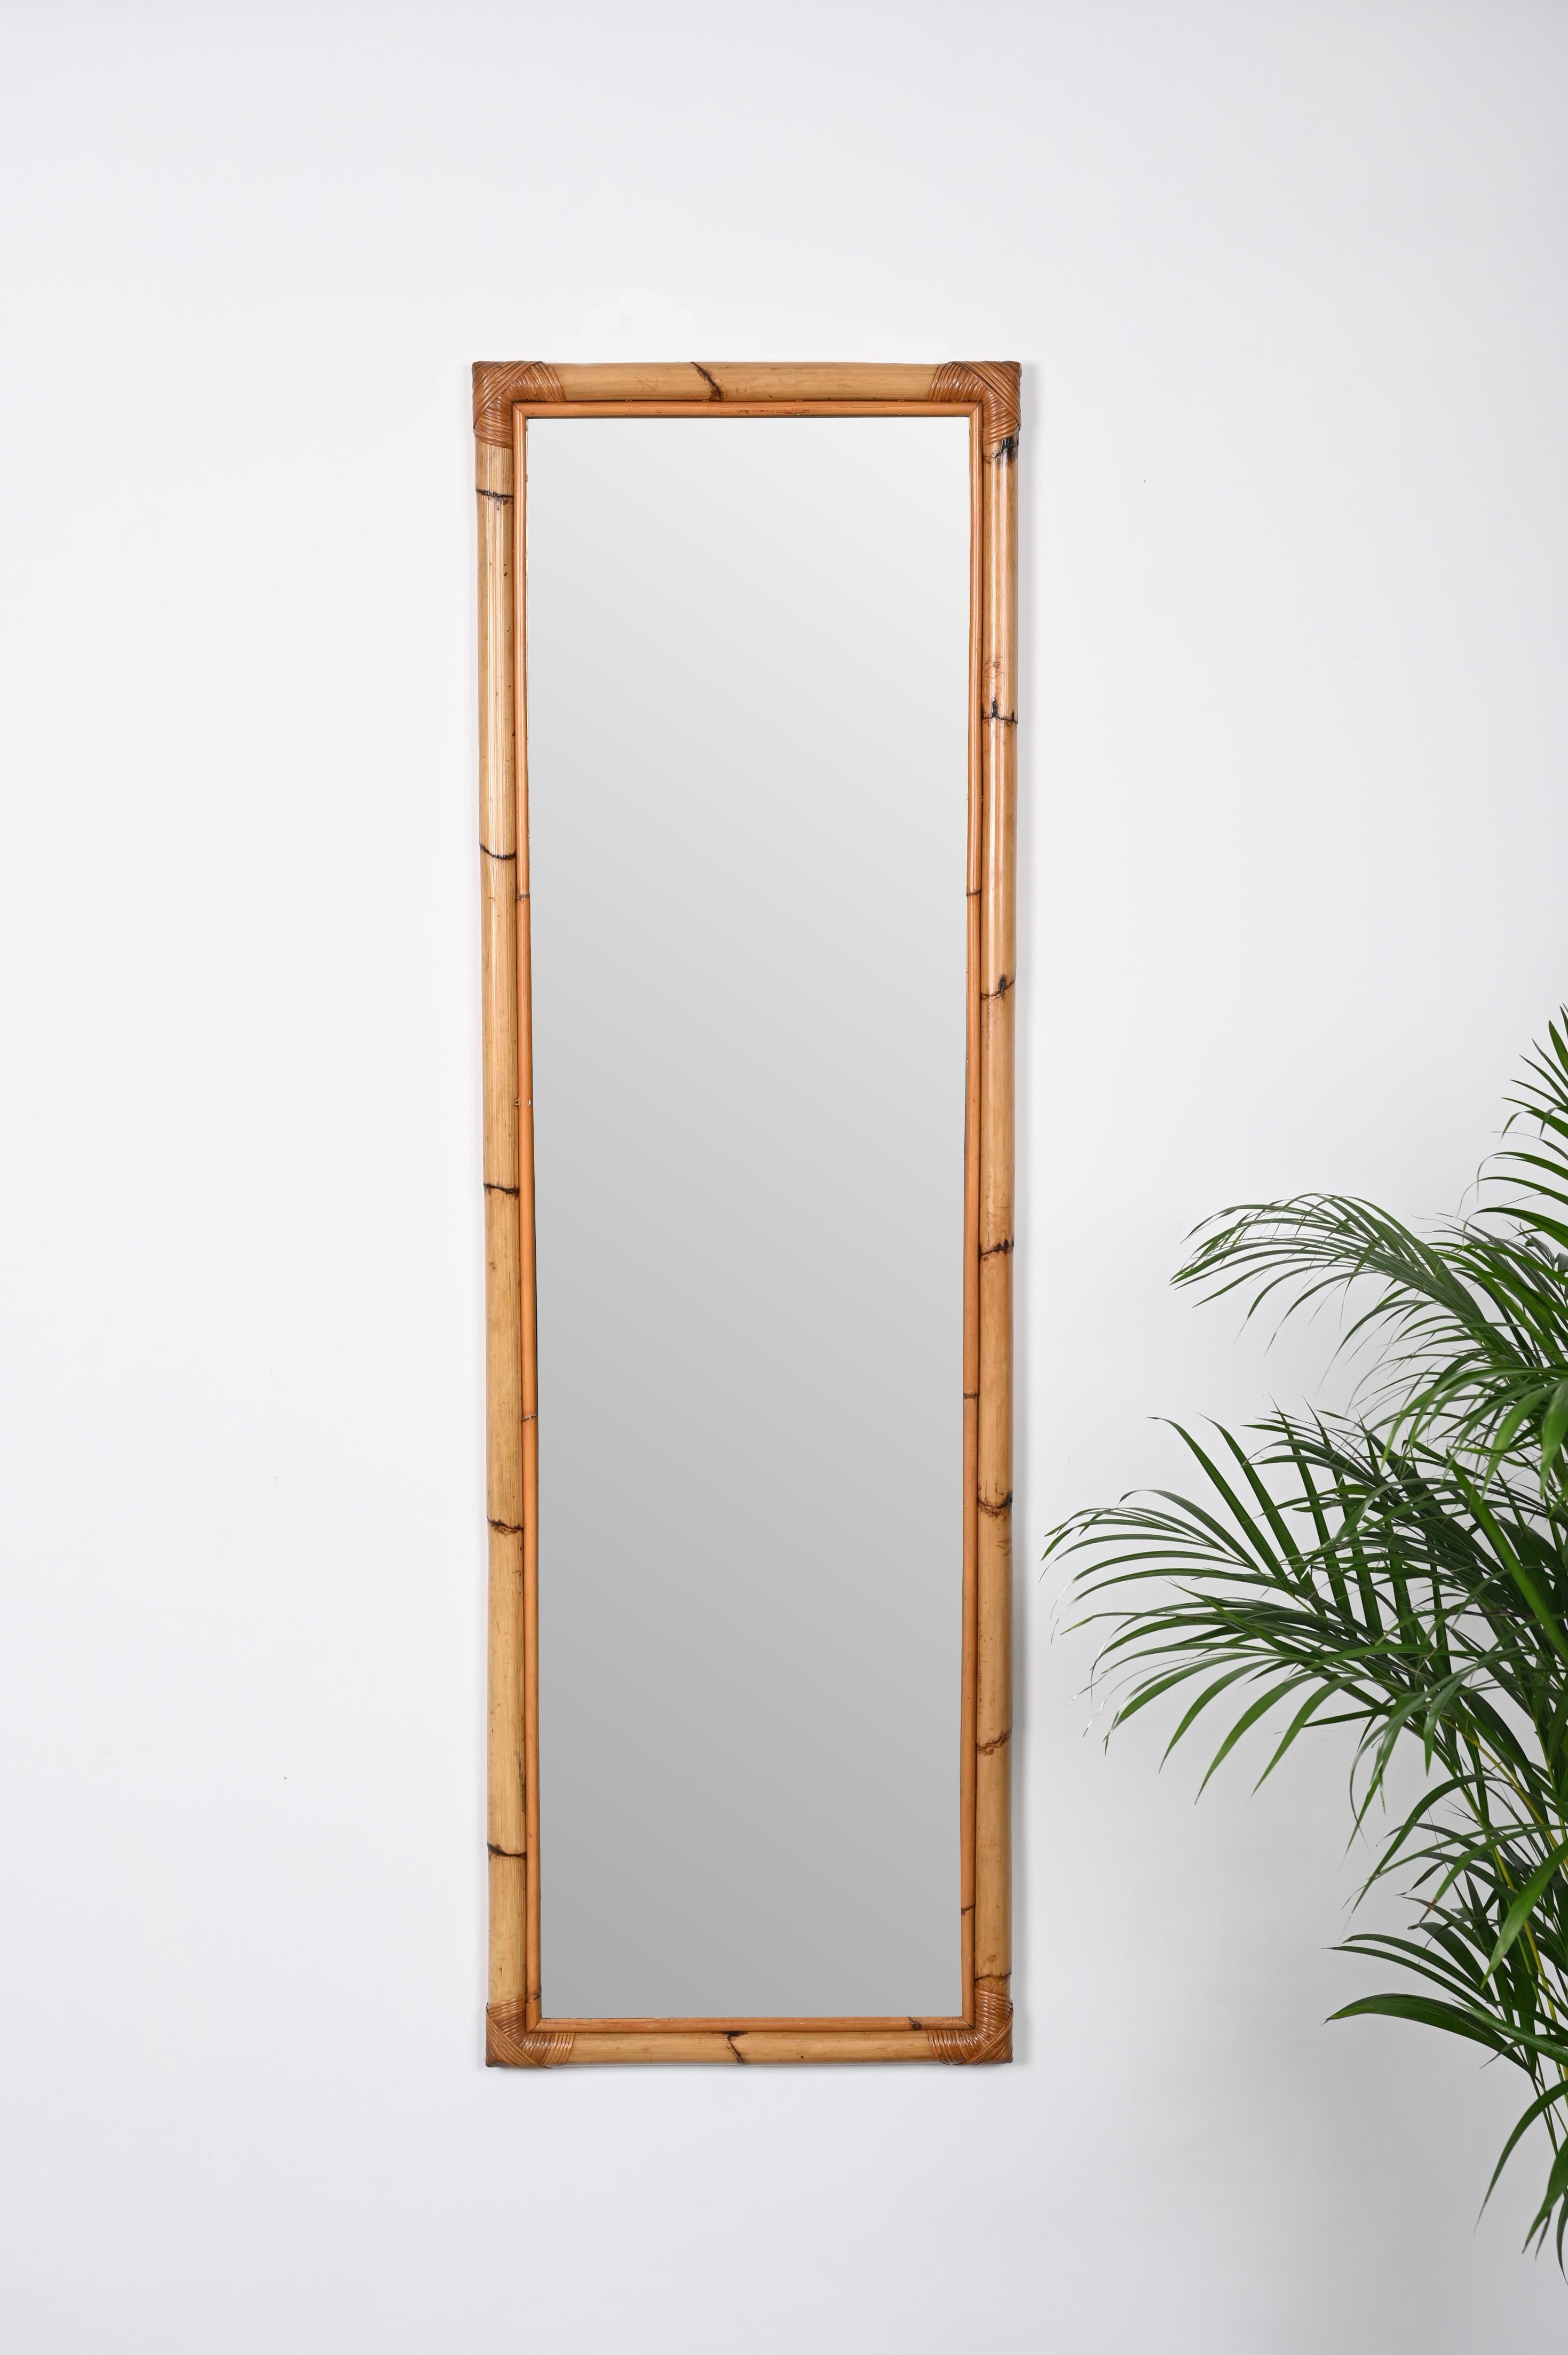 Midcentury Rectangular Mirror with Bamboo and Rattan Frame, Italy, 1970s For Sale 6